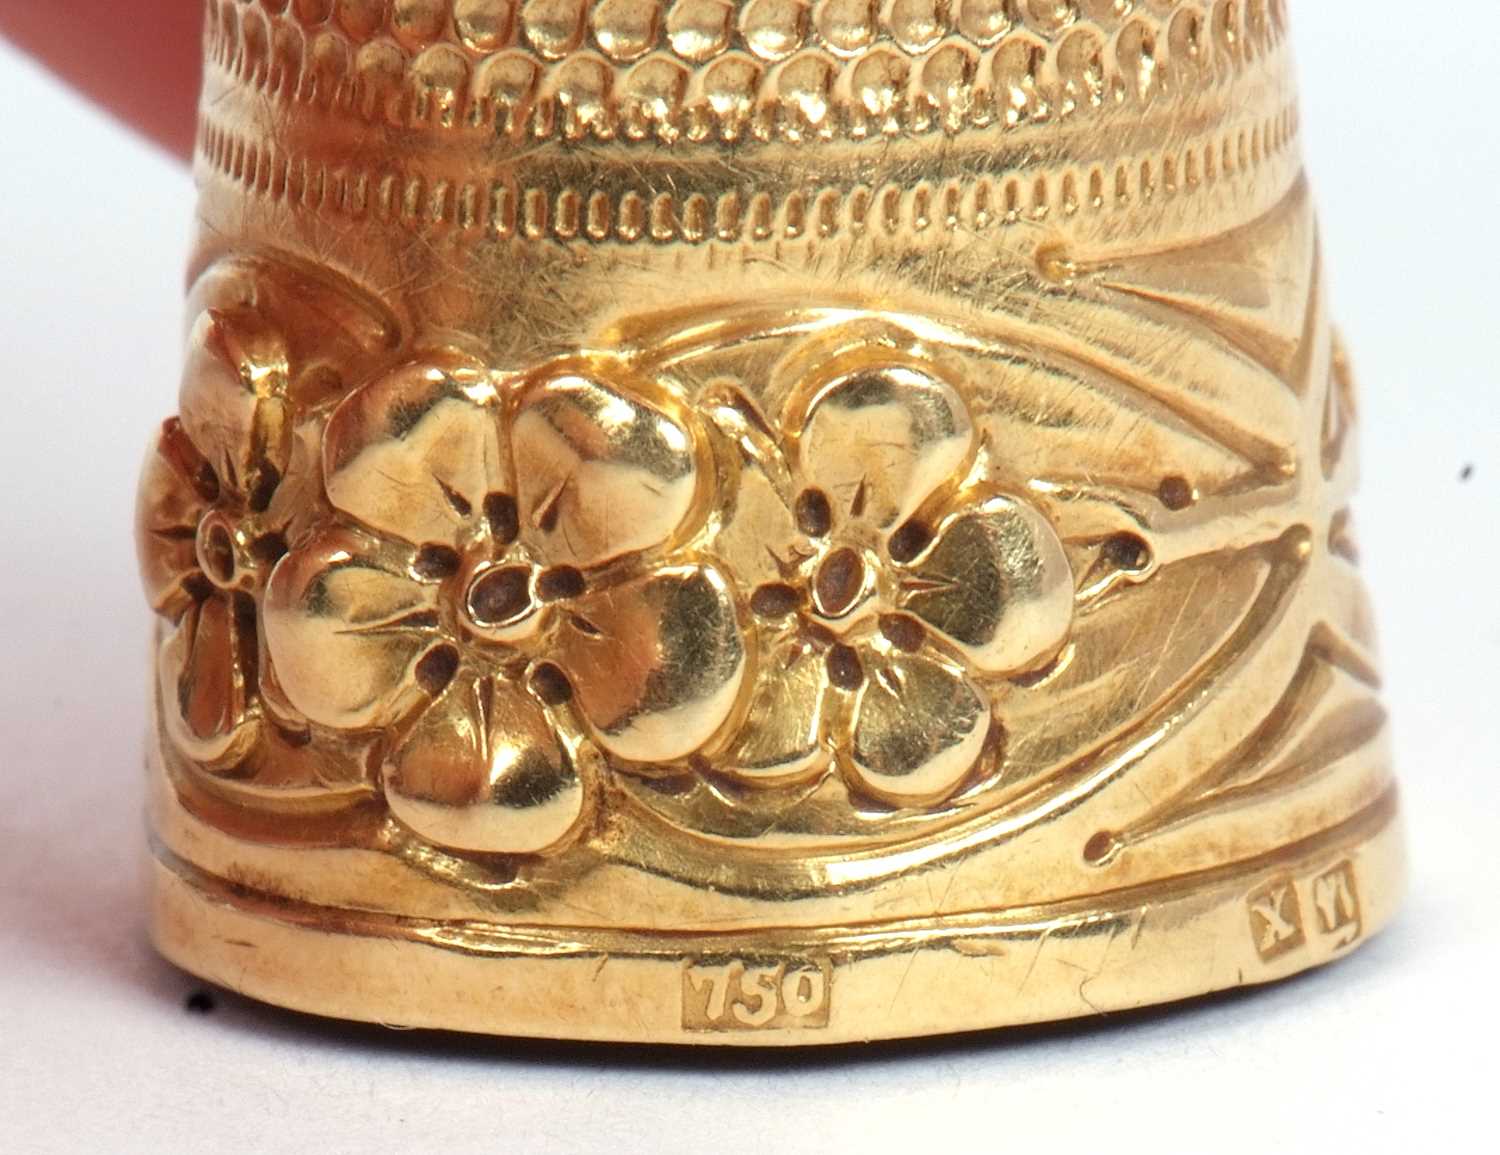 Antique 750 stamped thimble with a three leaf clover motif bottom band, the crown/cap with purple - Image 3 of 7